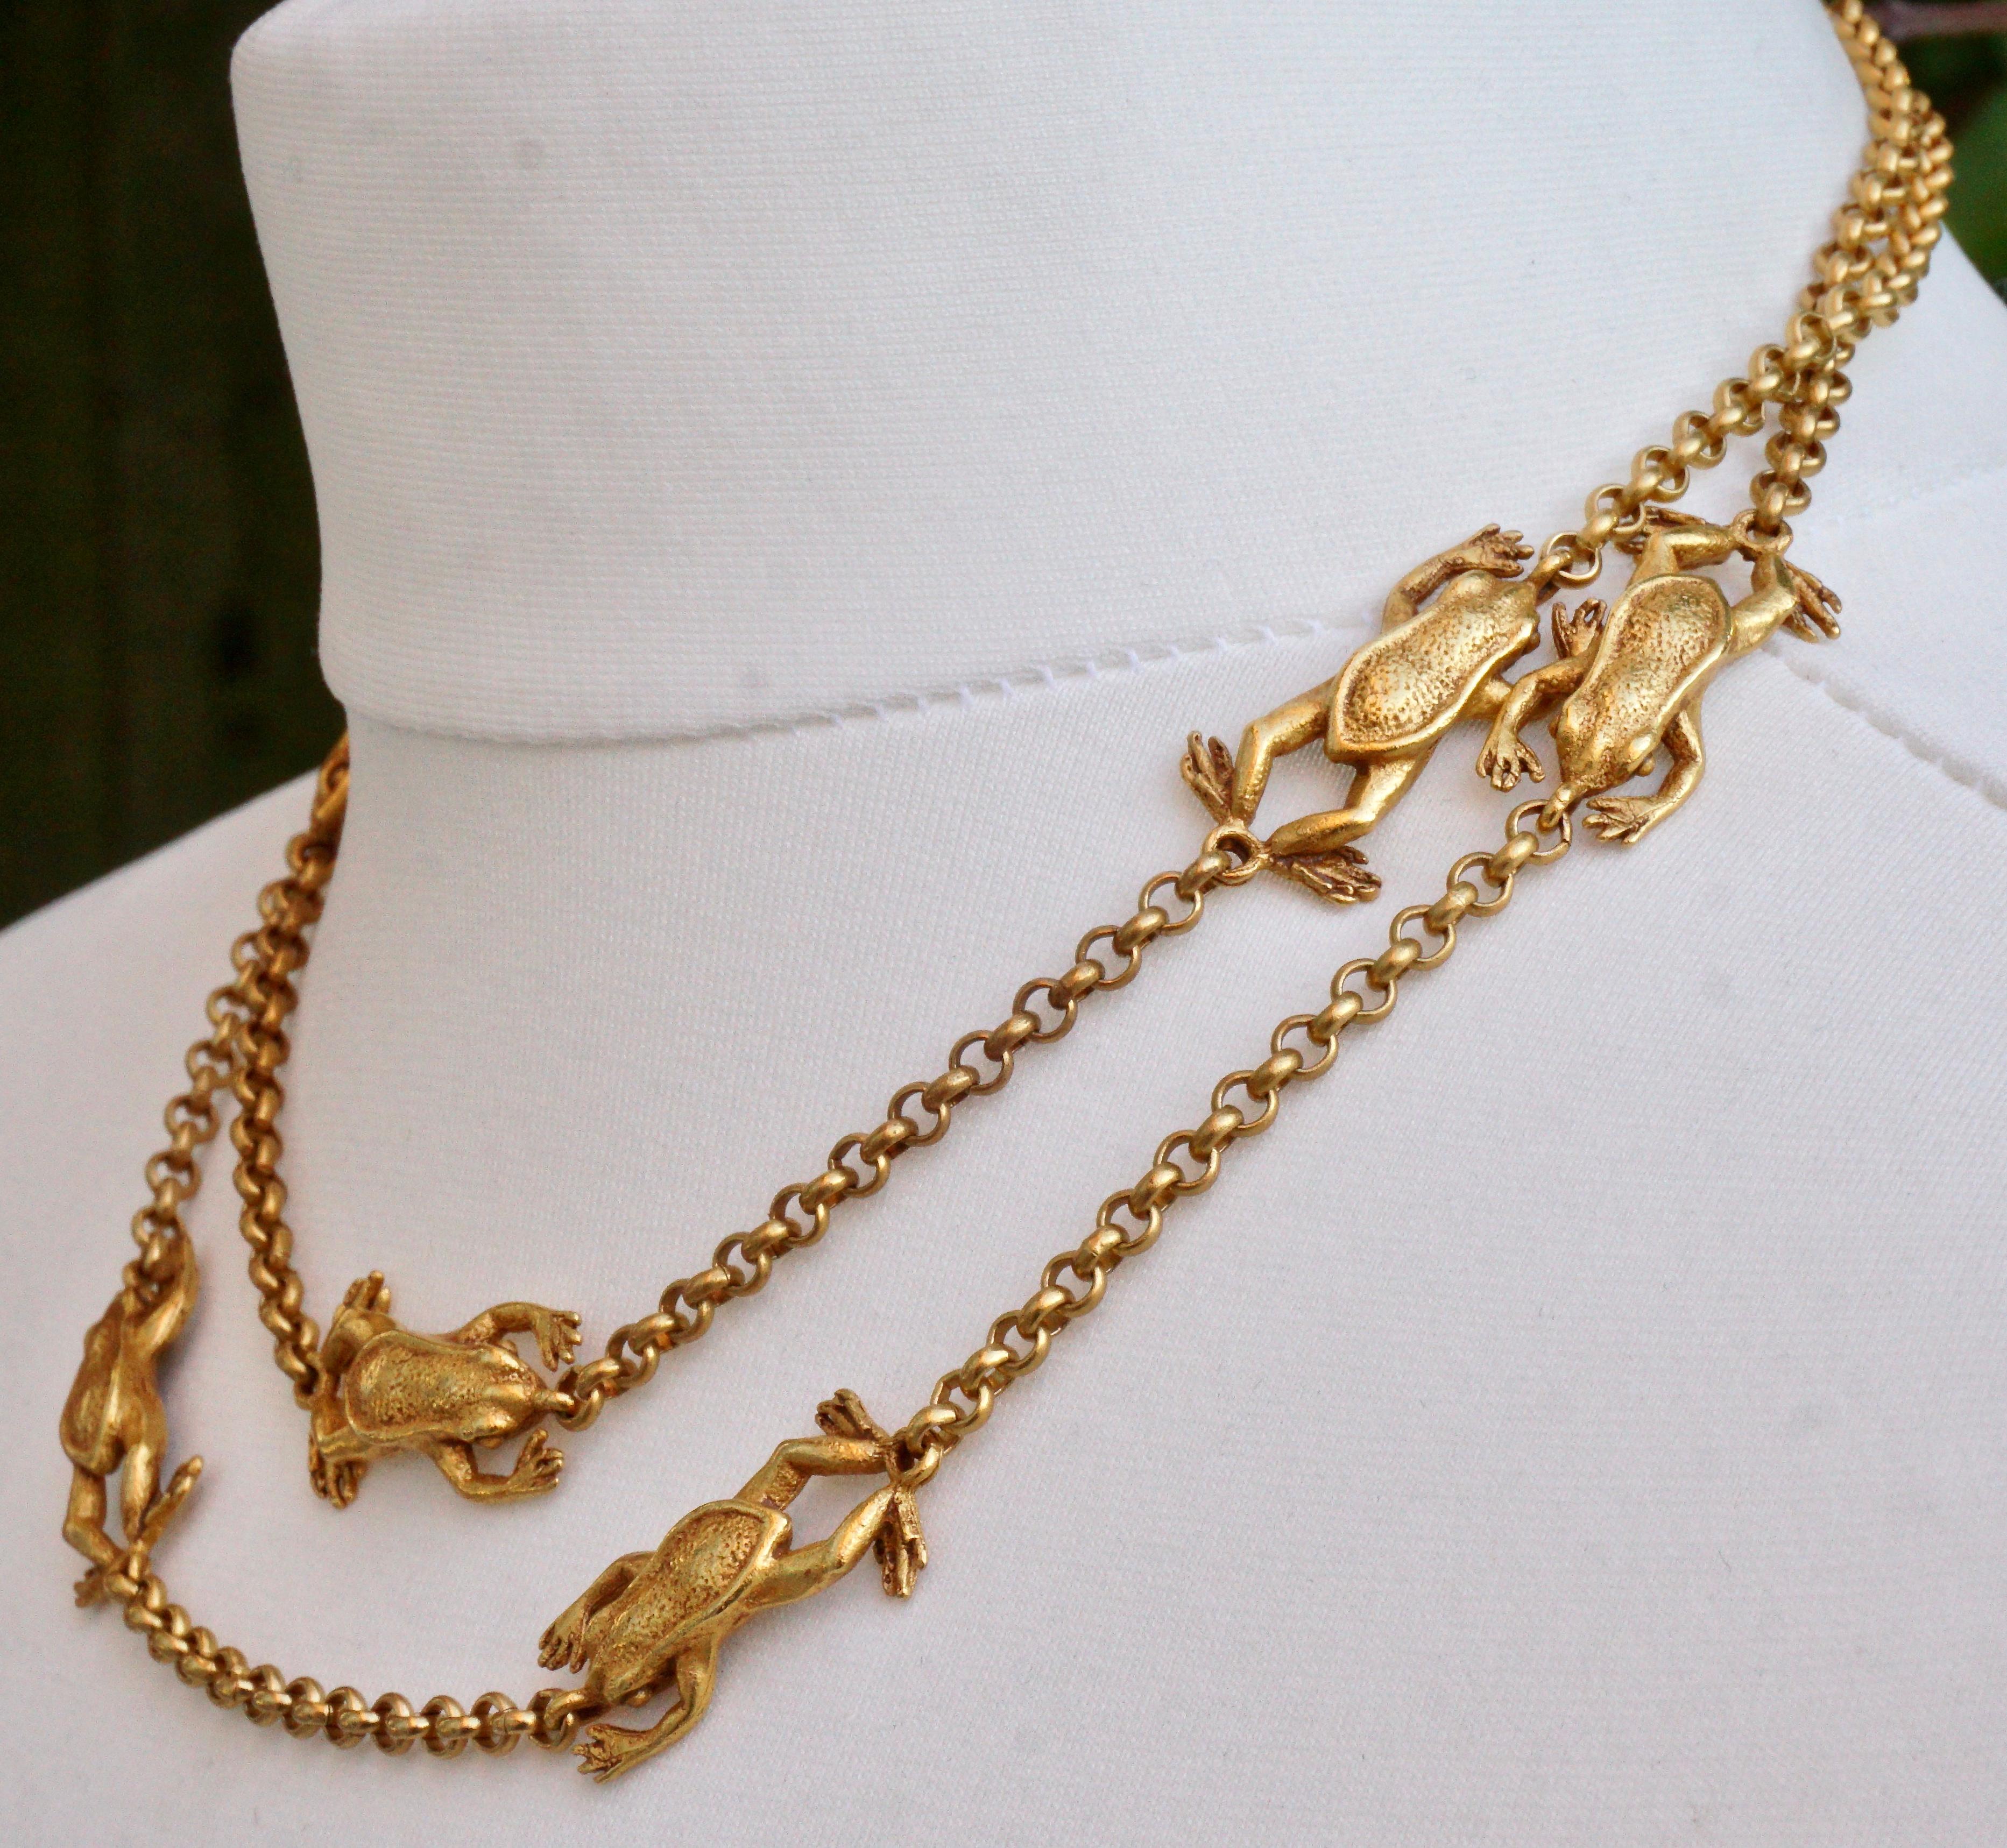 Askew London Long Gold Plated Frog Link Chain Necklace with a Flower Clasp 5